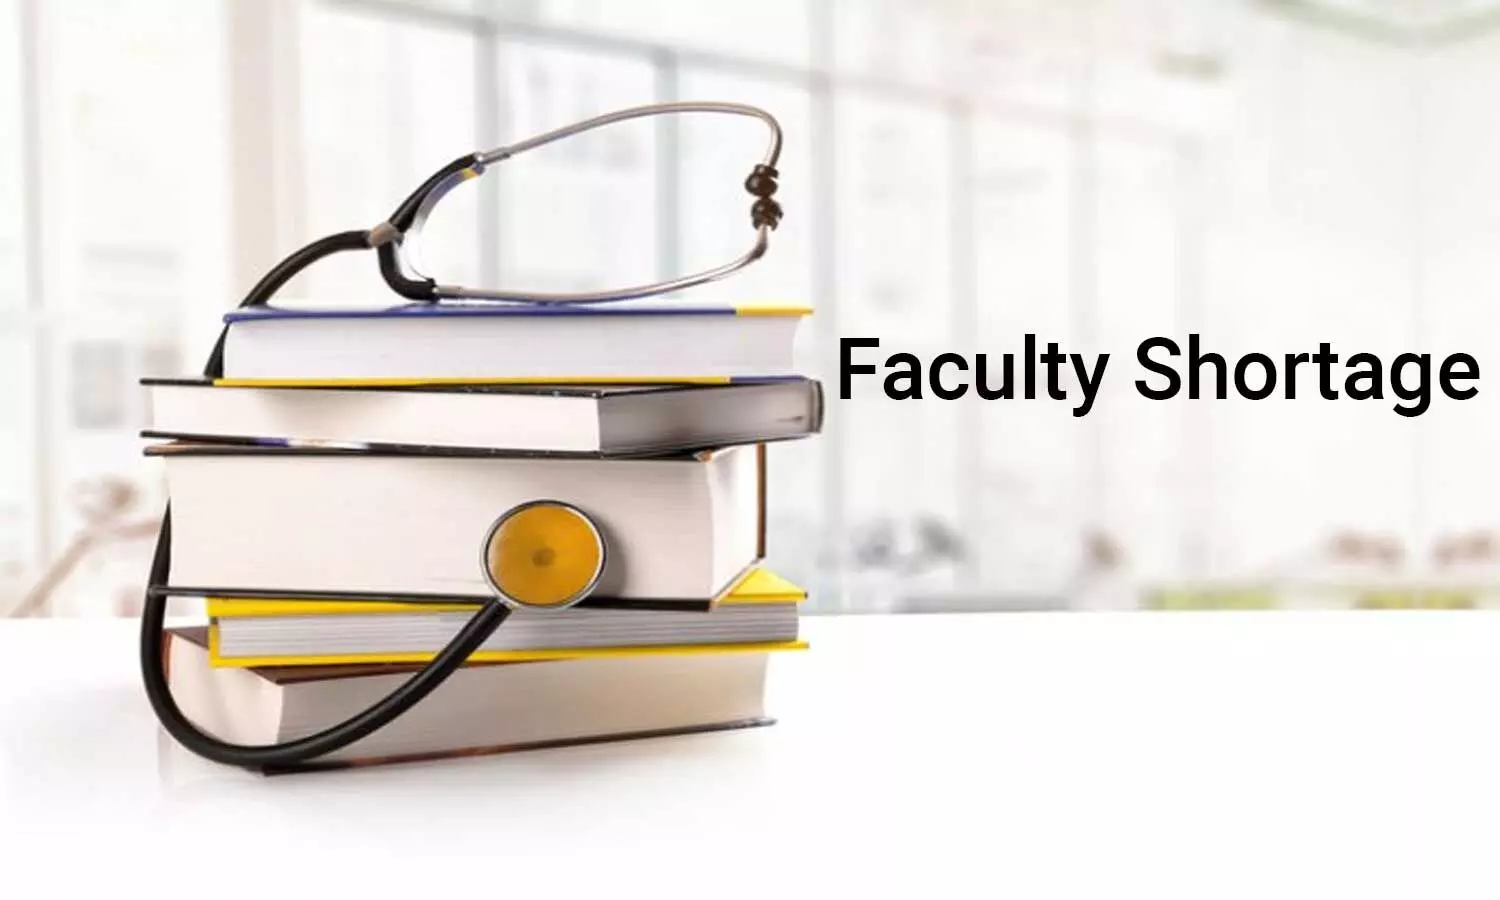 Visiting faculty in Medical Colleges: Professor to get Rs 10,000; AP to get Rs 8000 for 10 days in Jammu and Kashmir